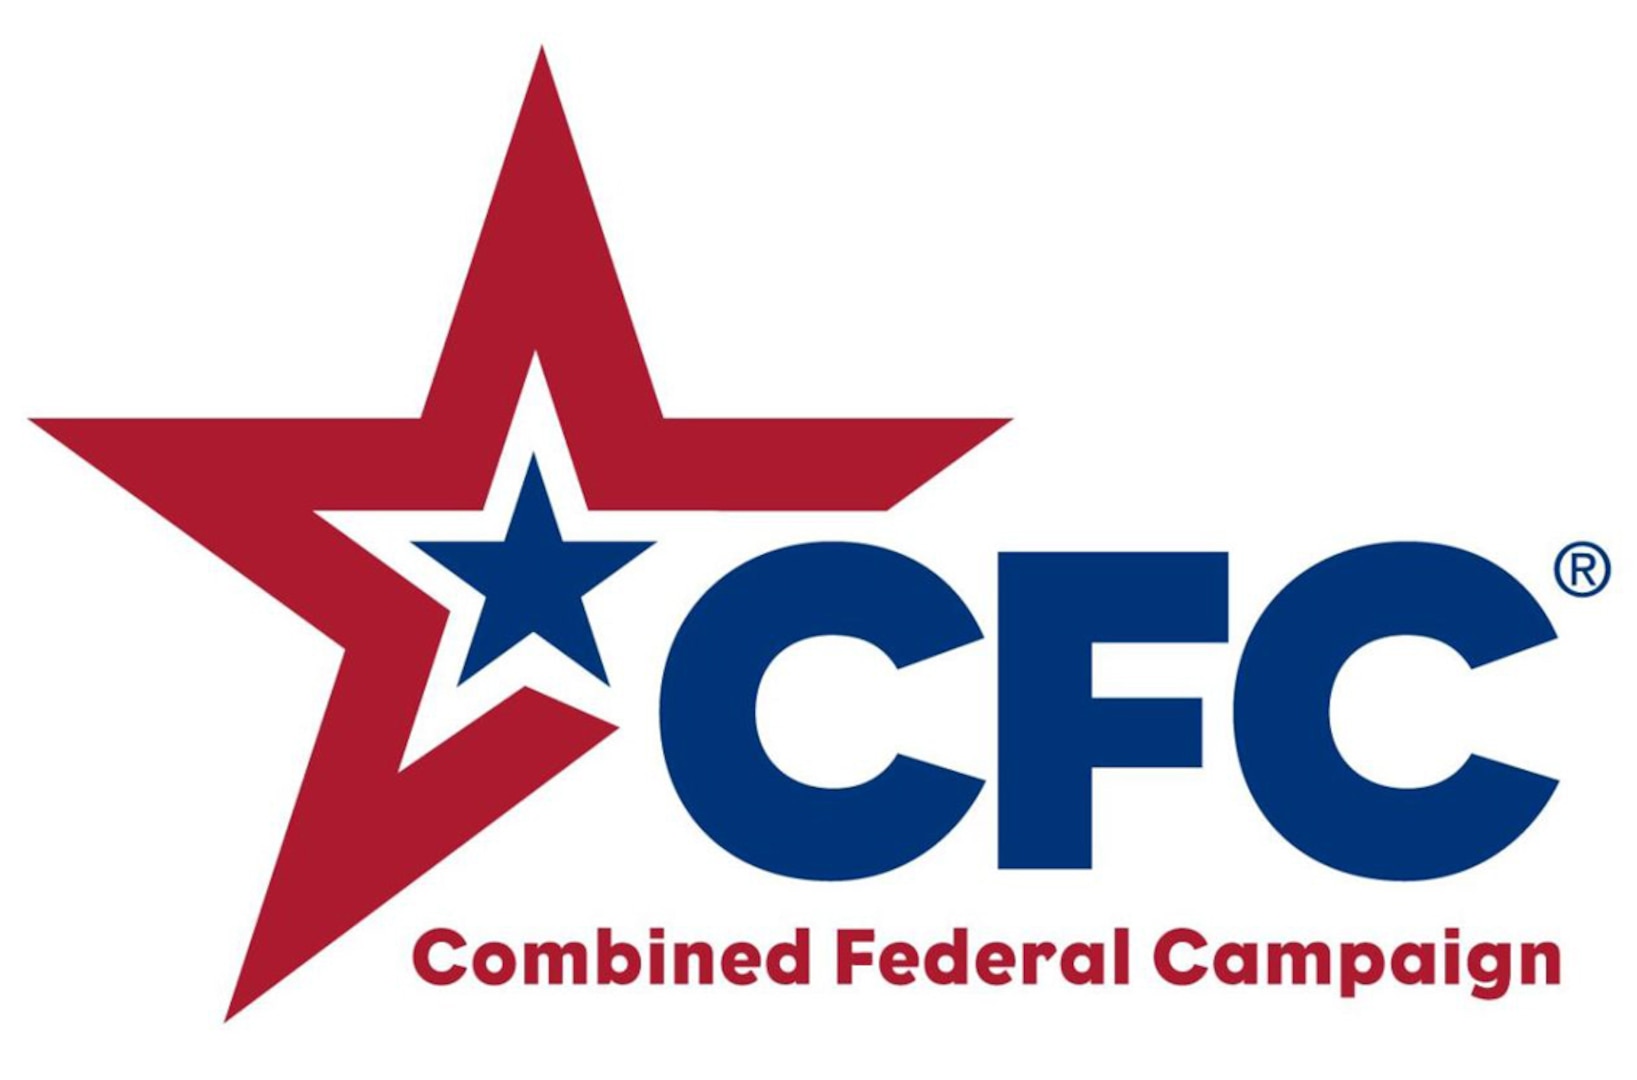 As the only charity authorized for the federal workplace, the Combined Federal Campaign has raised more than $7 billion for charities over the past 50 years.